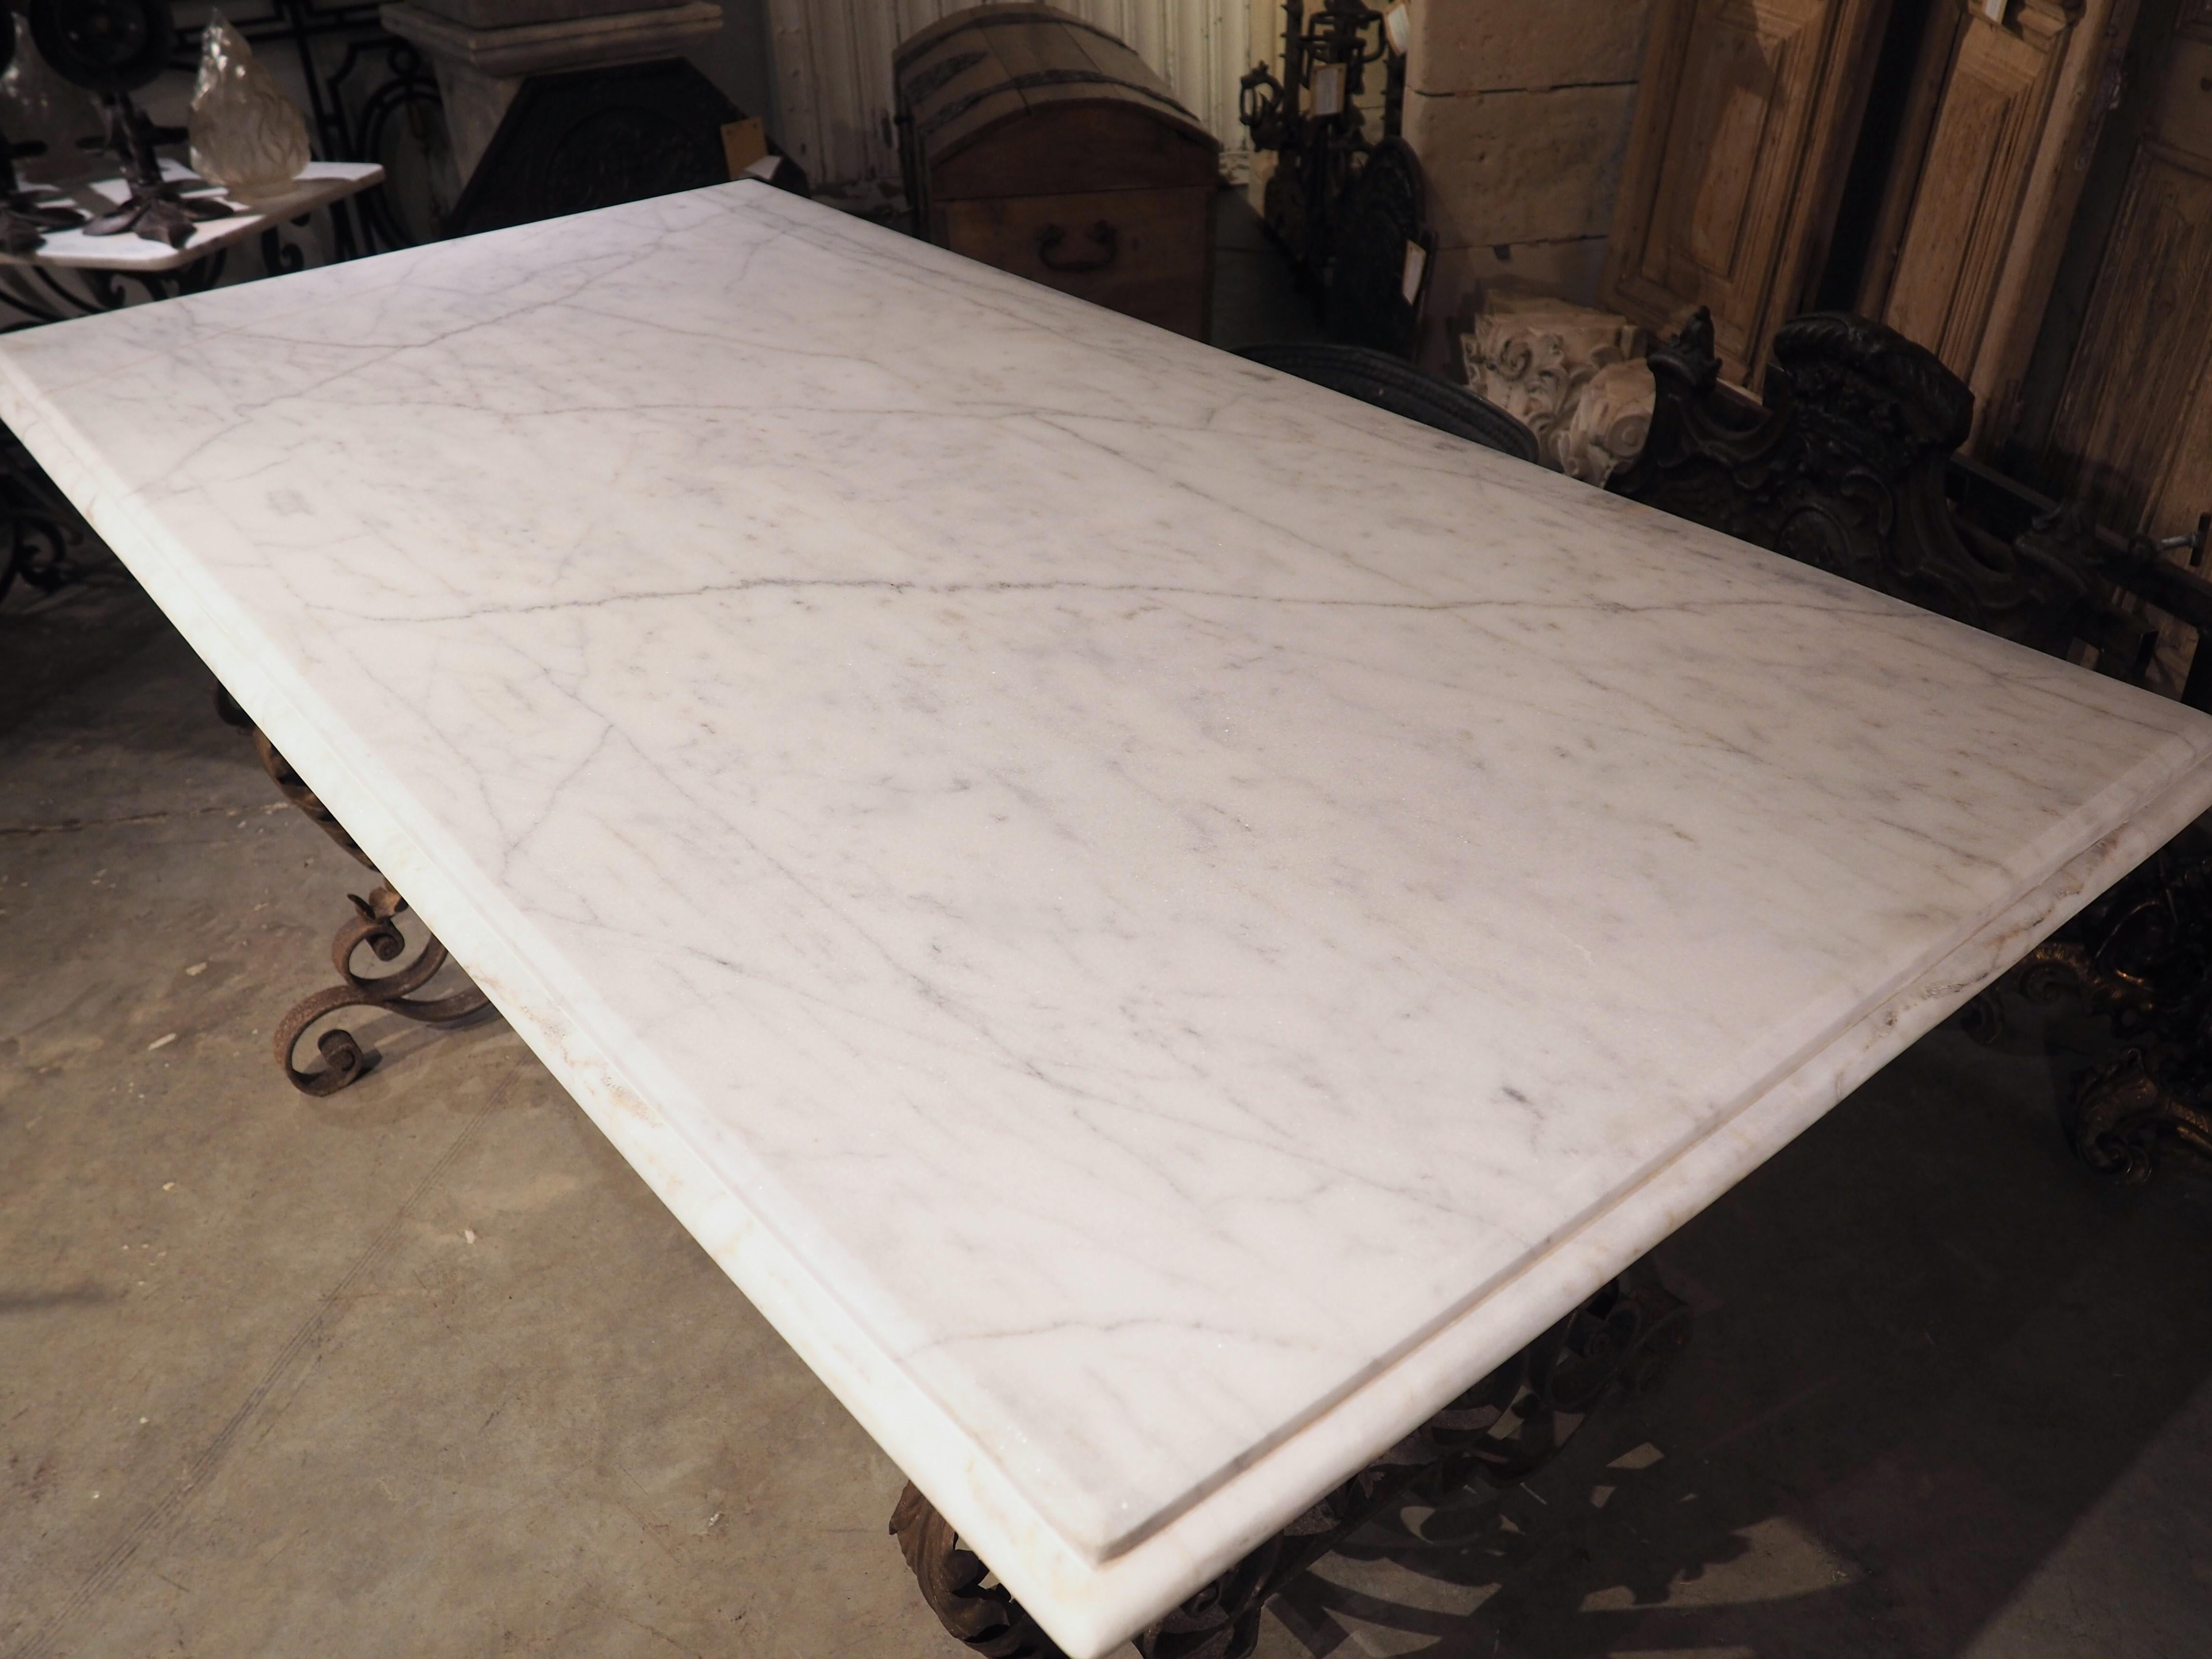 A luxurious marble top with recessed quarter round molding tops a highly scrolled wrought iron base on this French table from the 1940’s. The white Carrara marble has dark gray veining, while the iron base, which features a speckled rust/brown